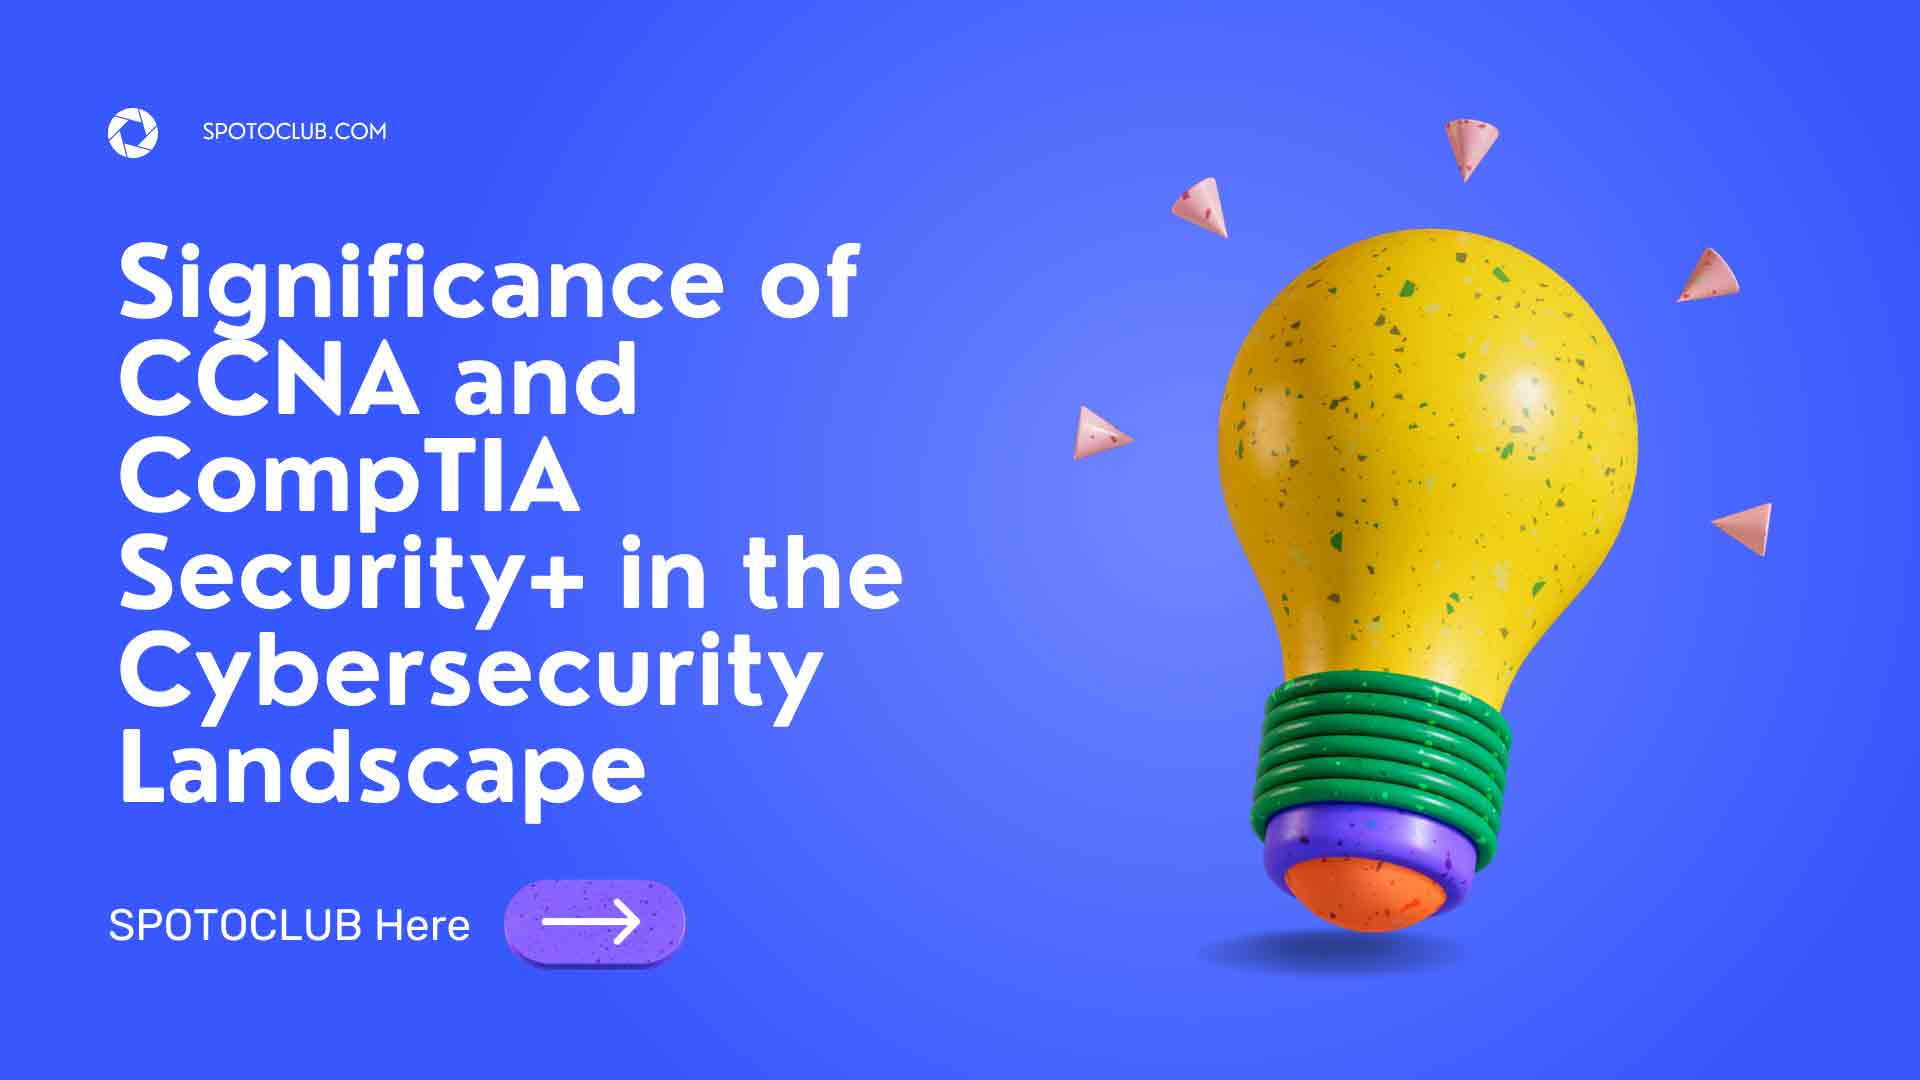 Significance of CCNA and CompTIA Security+ in the Cybersecurity Landscape